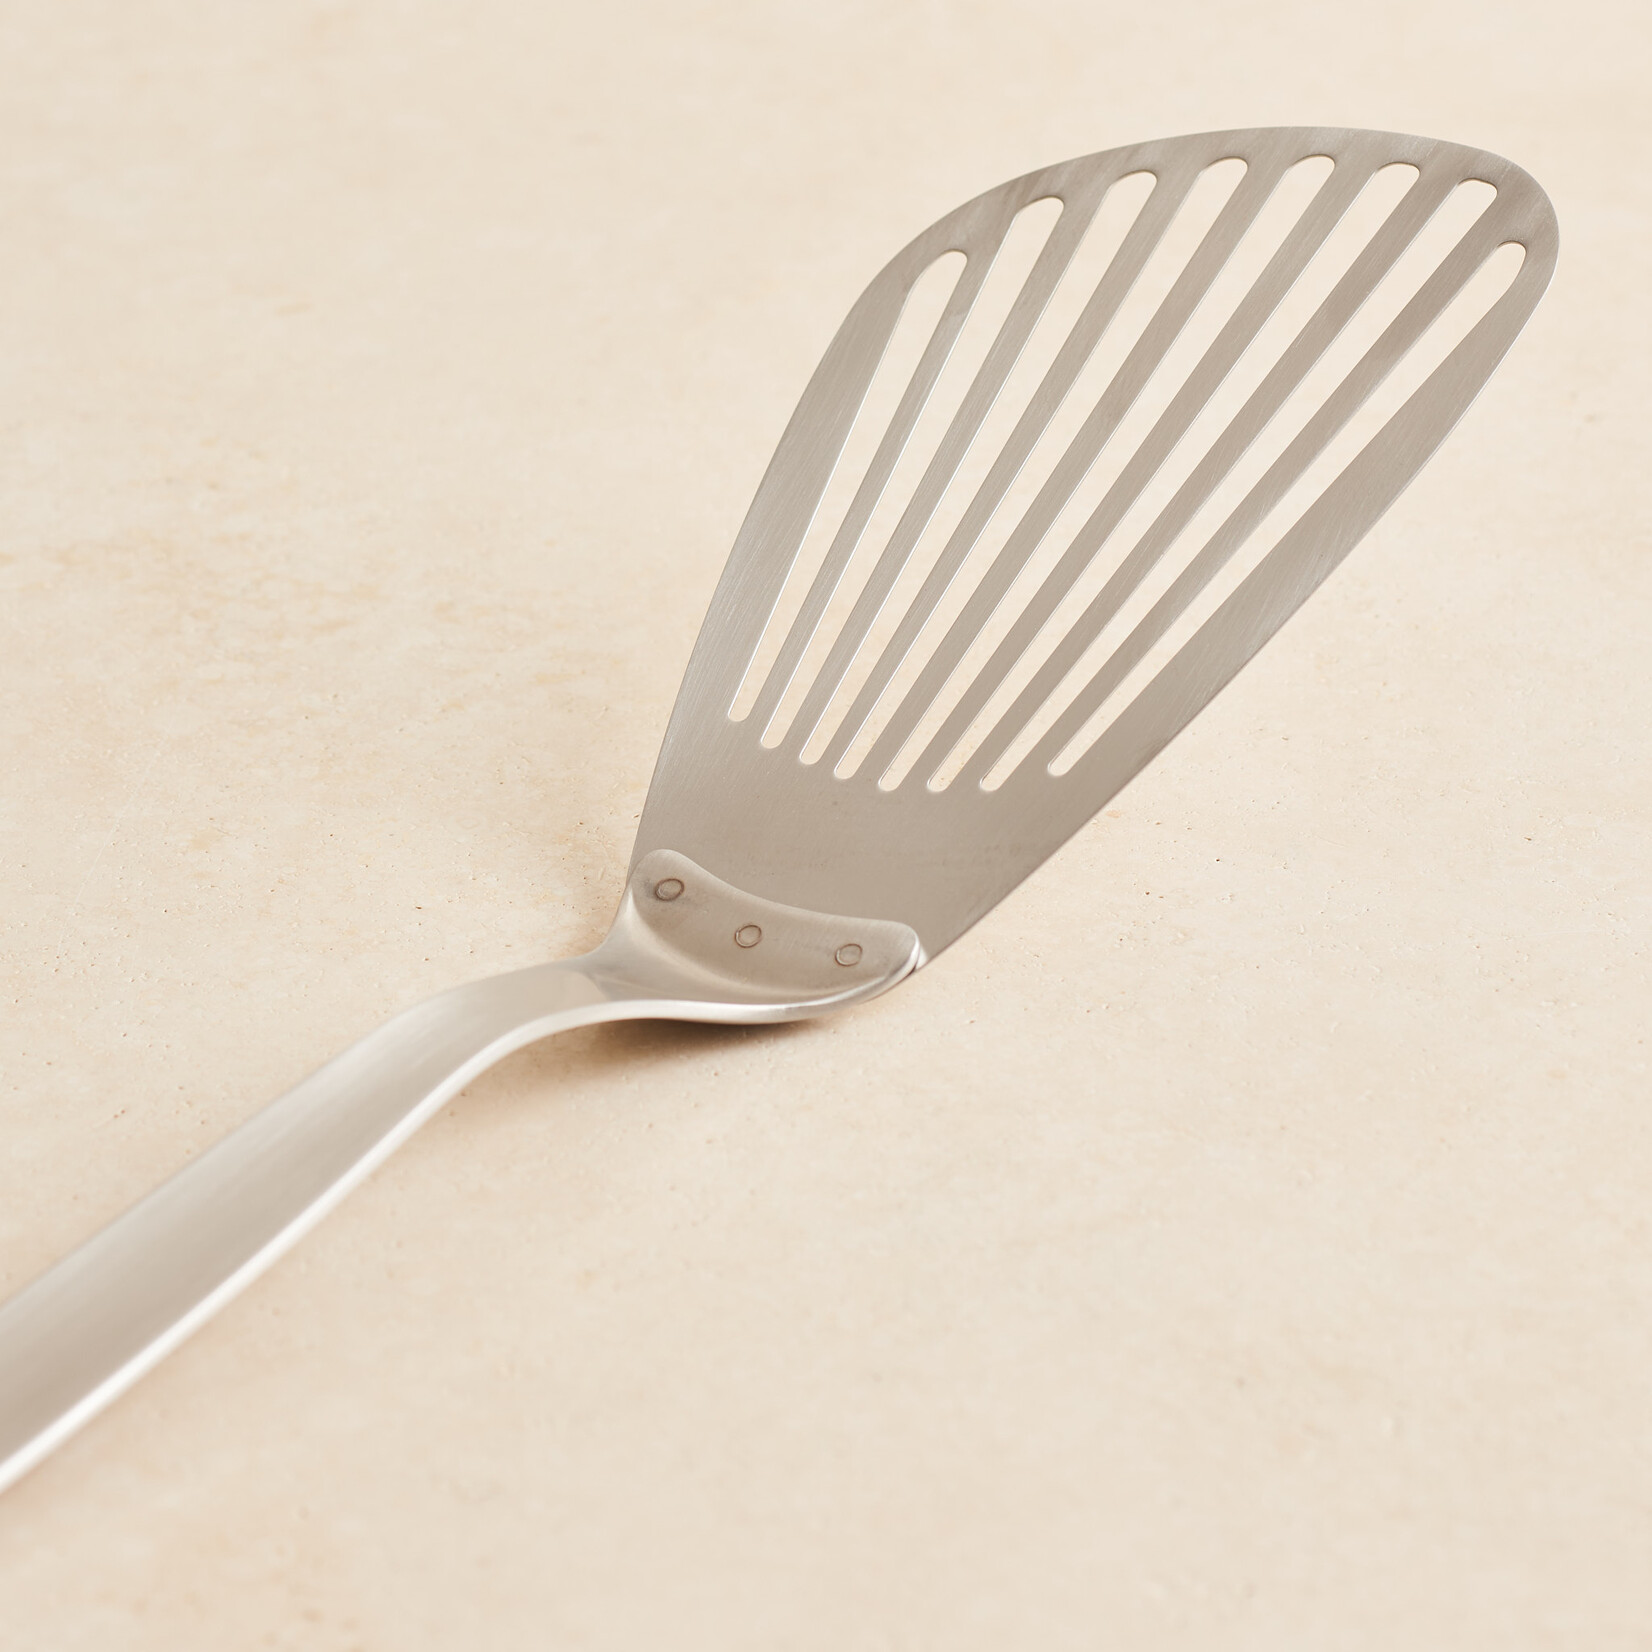 Japanese Stainless Steel Long Spatula